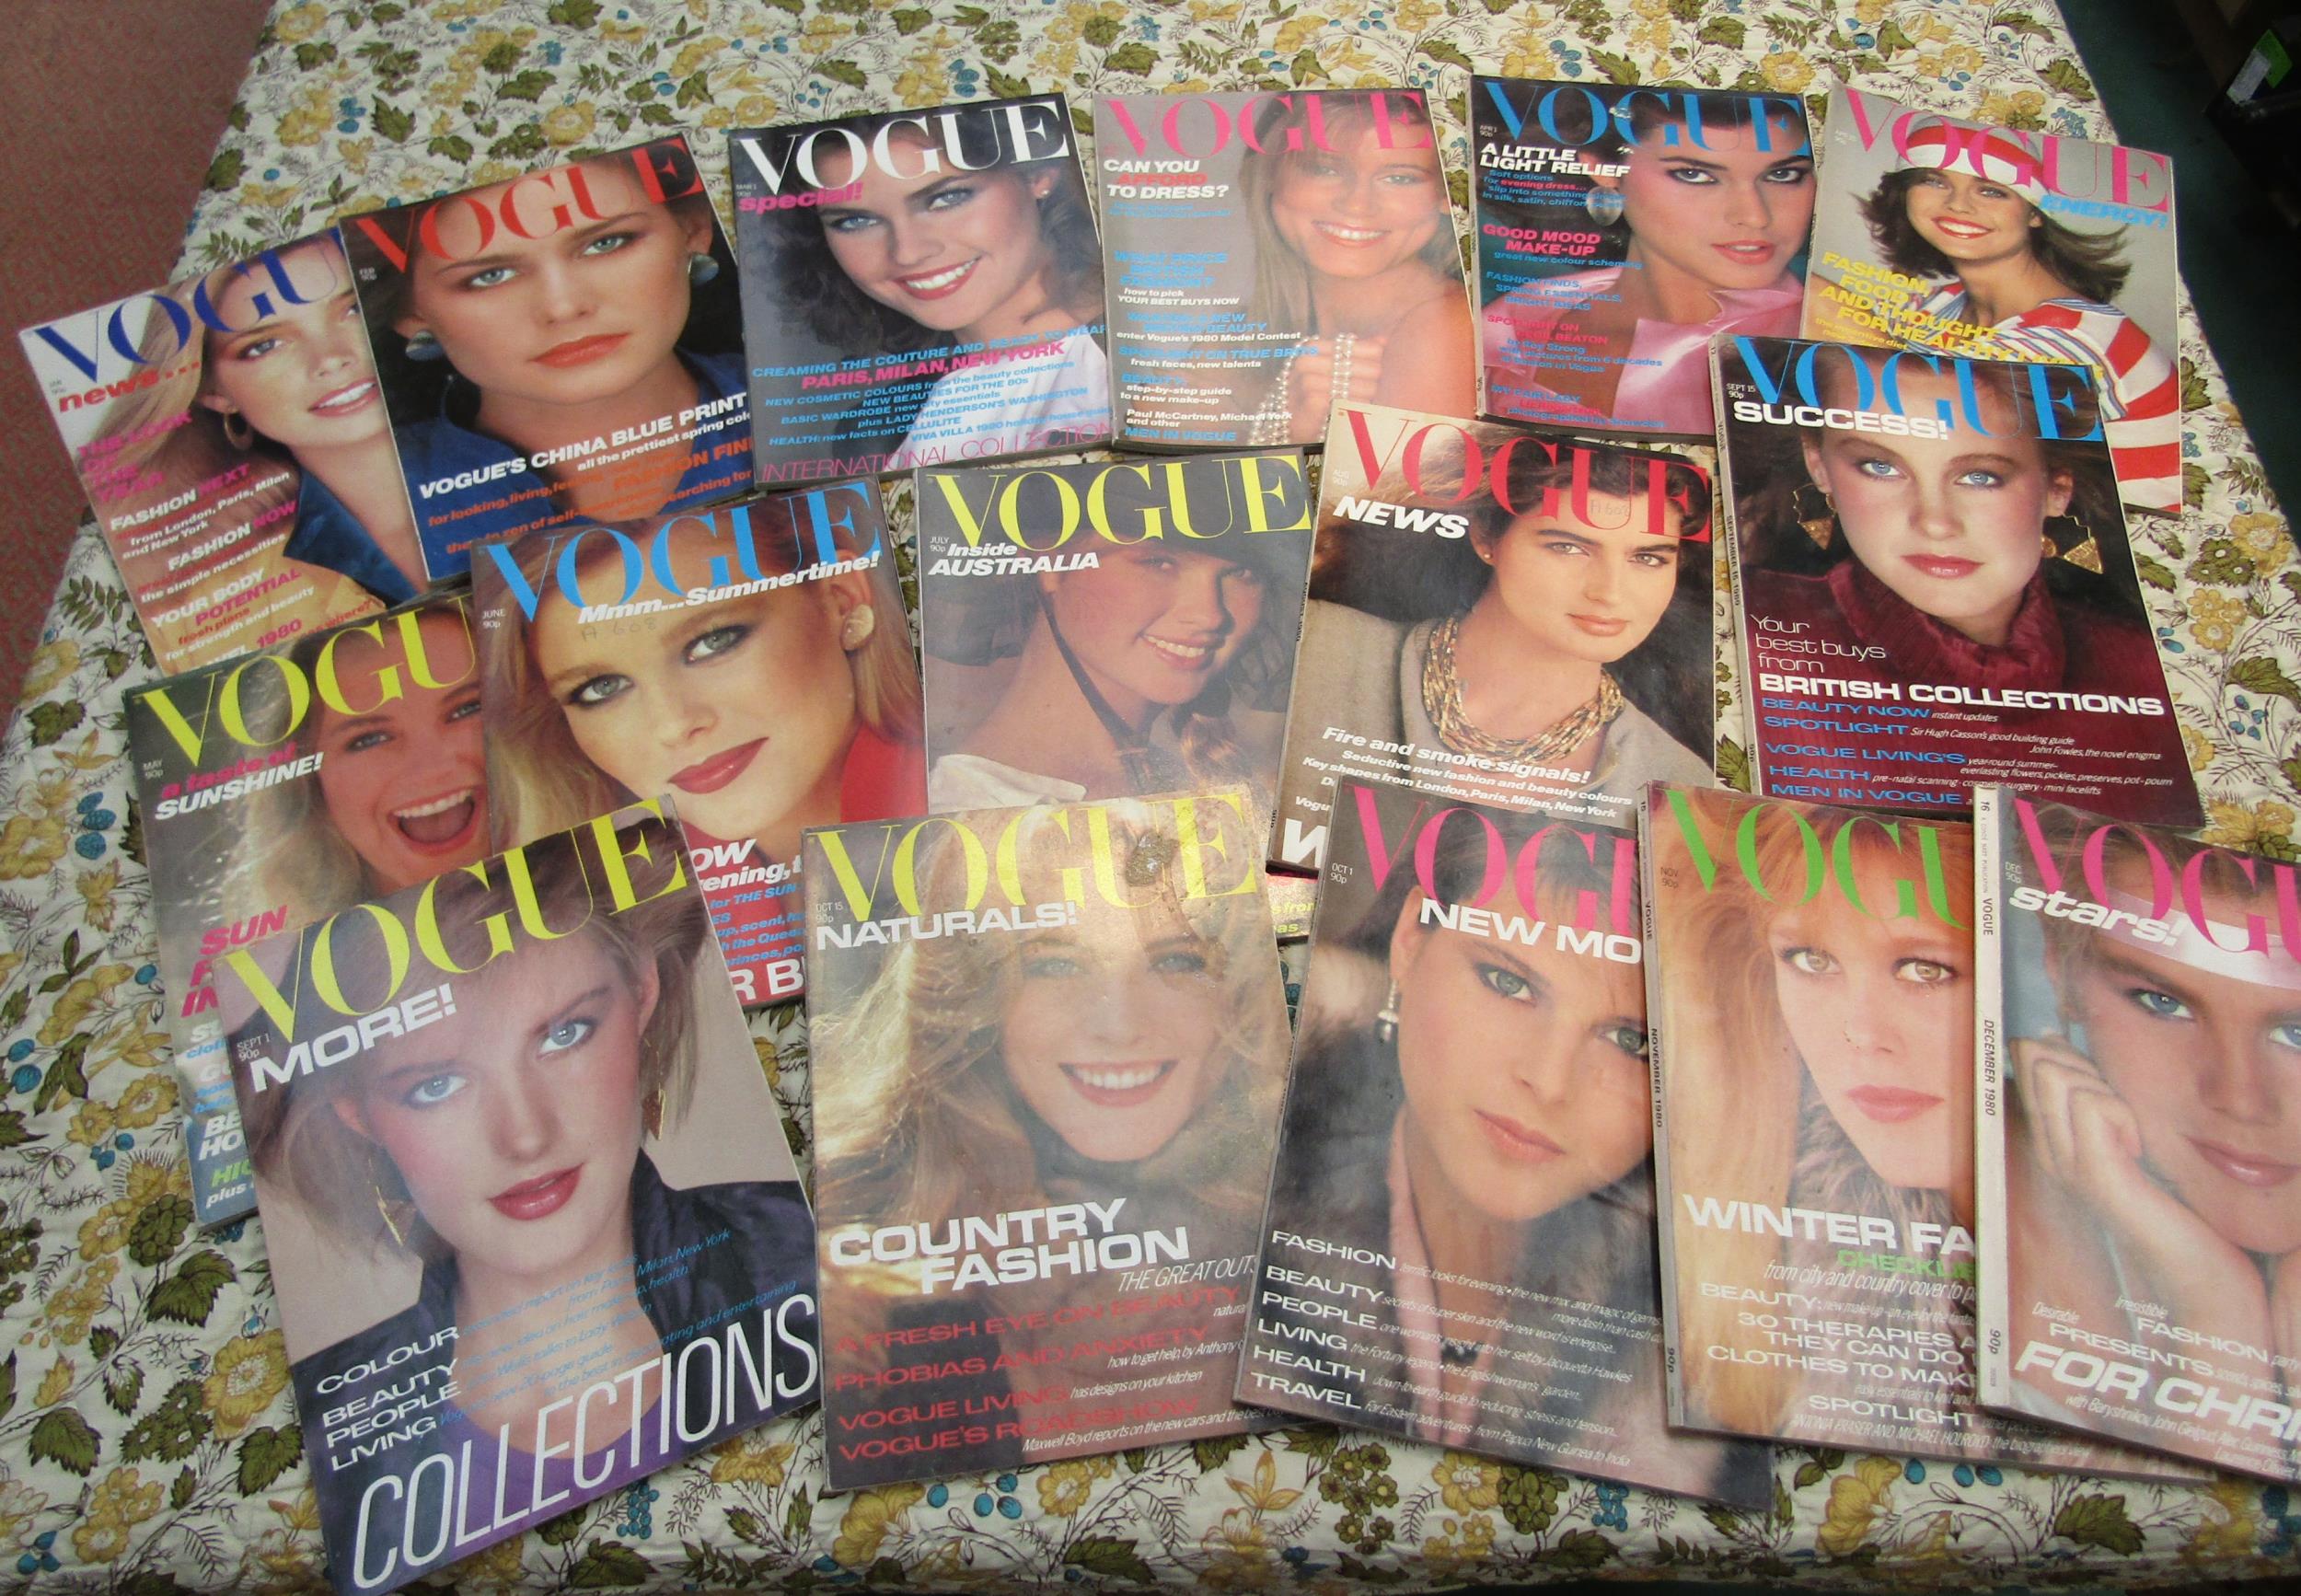 British Vogue magazine 1980 - January (1), February (2), March 1st (3), March 15th (4), April 1st ( - Image 38 of 40